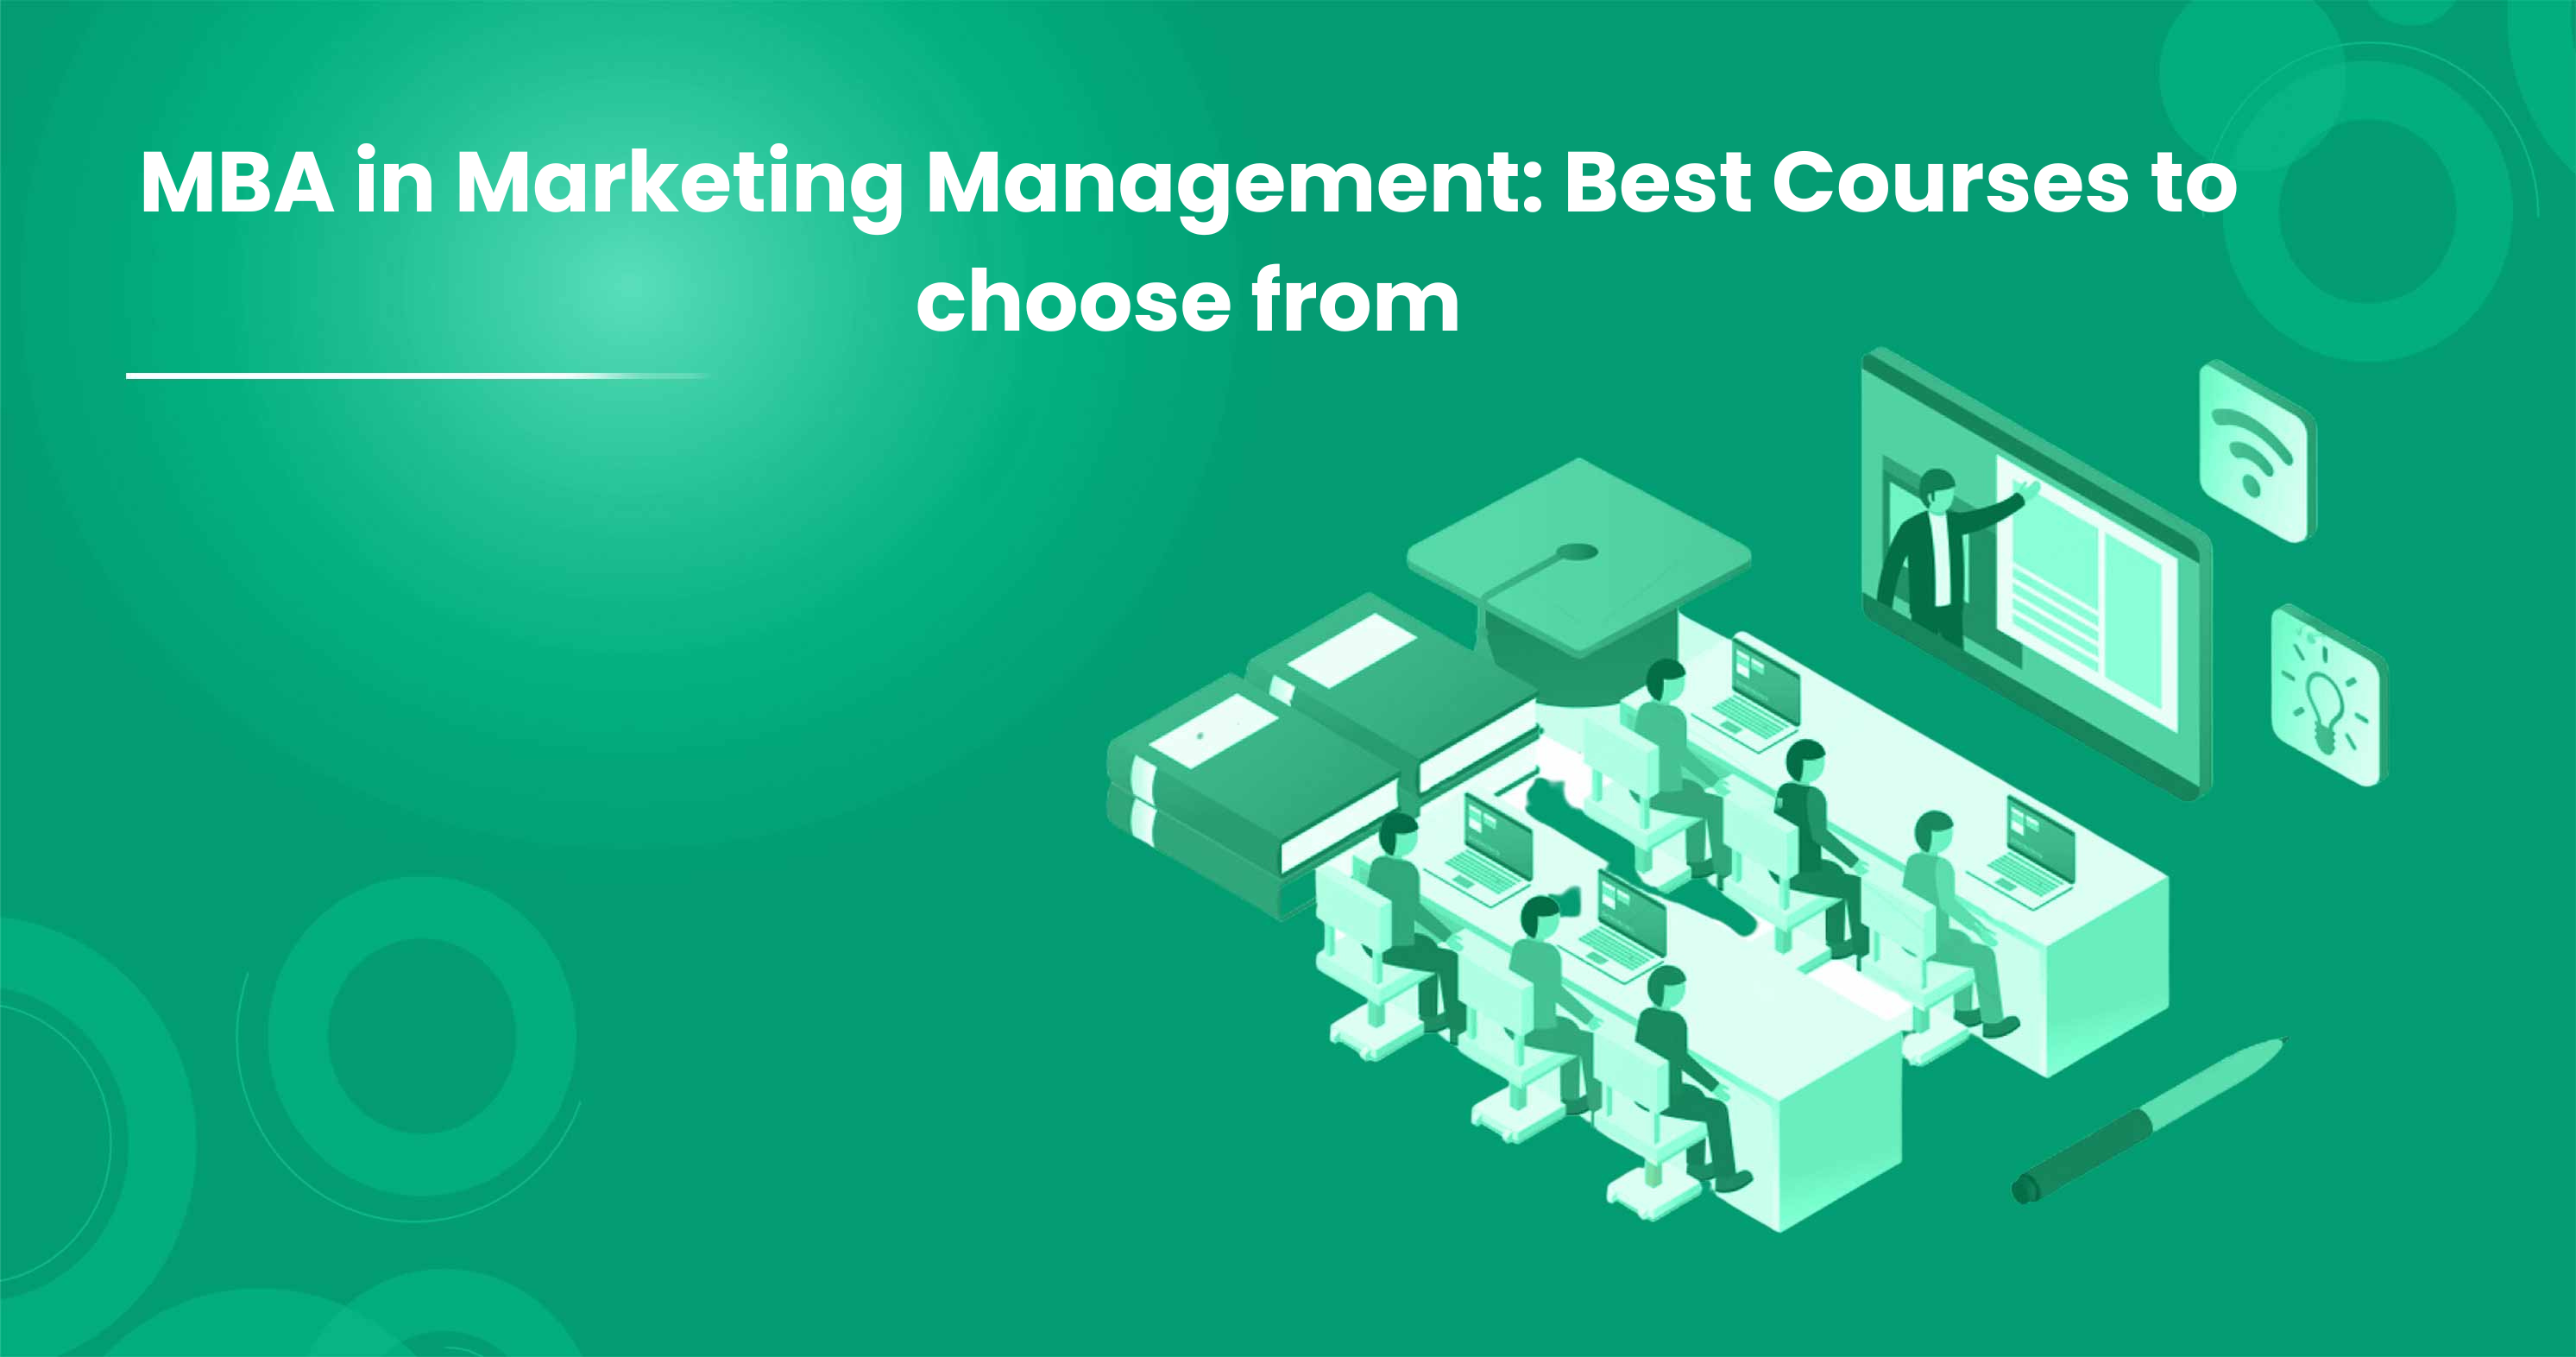 MBA in Marketing Management: Best Courses to choose from